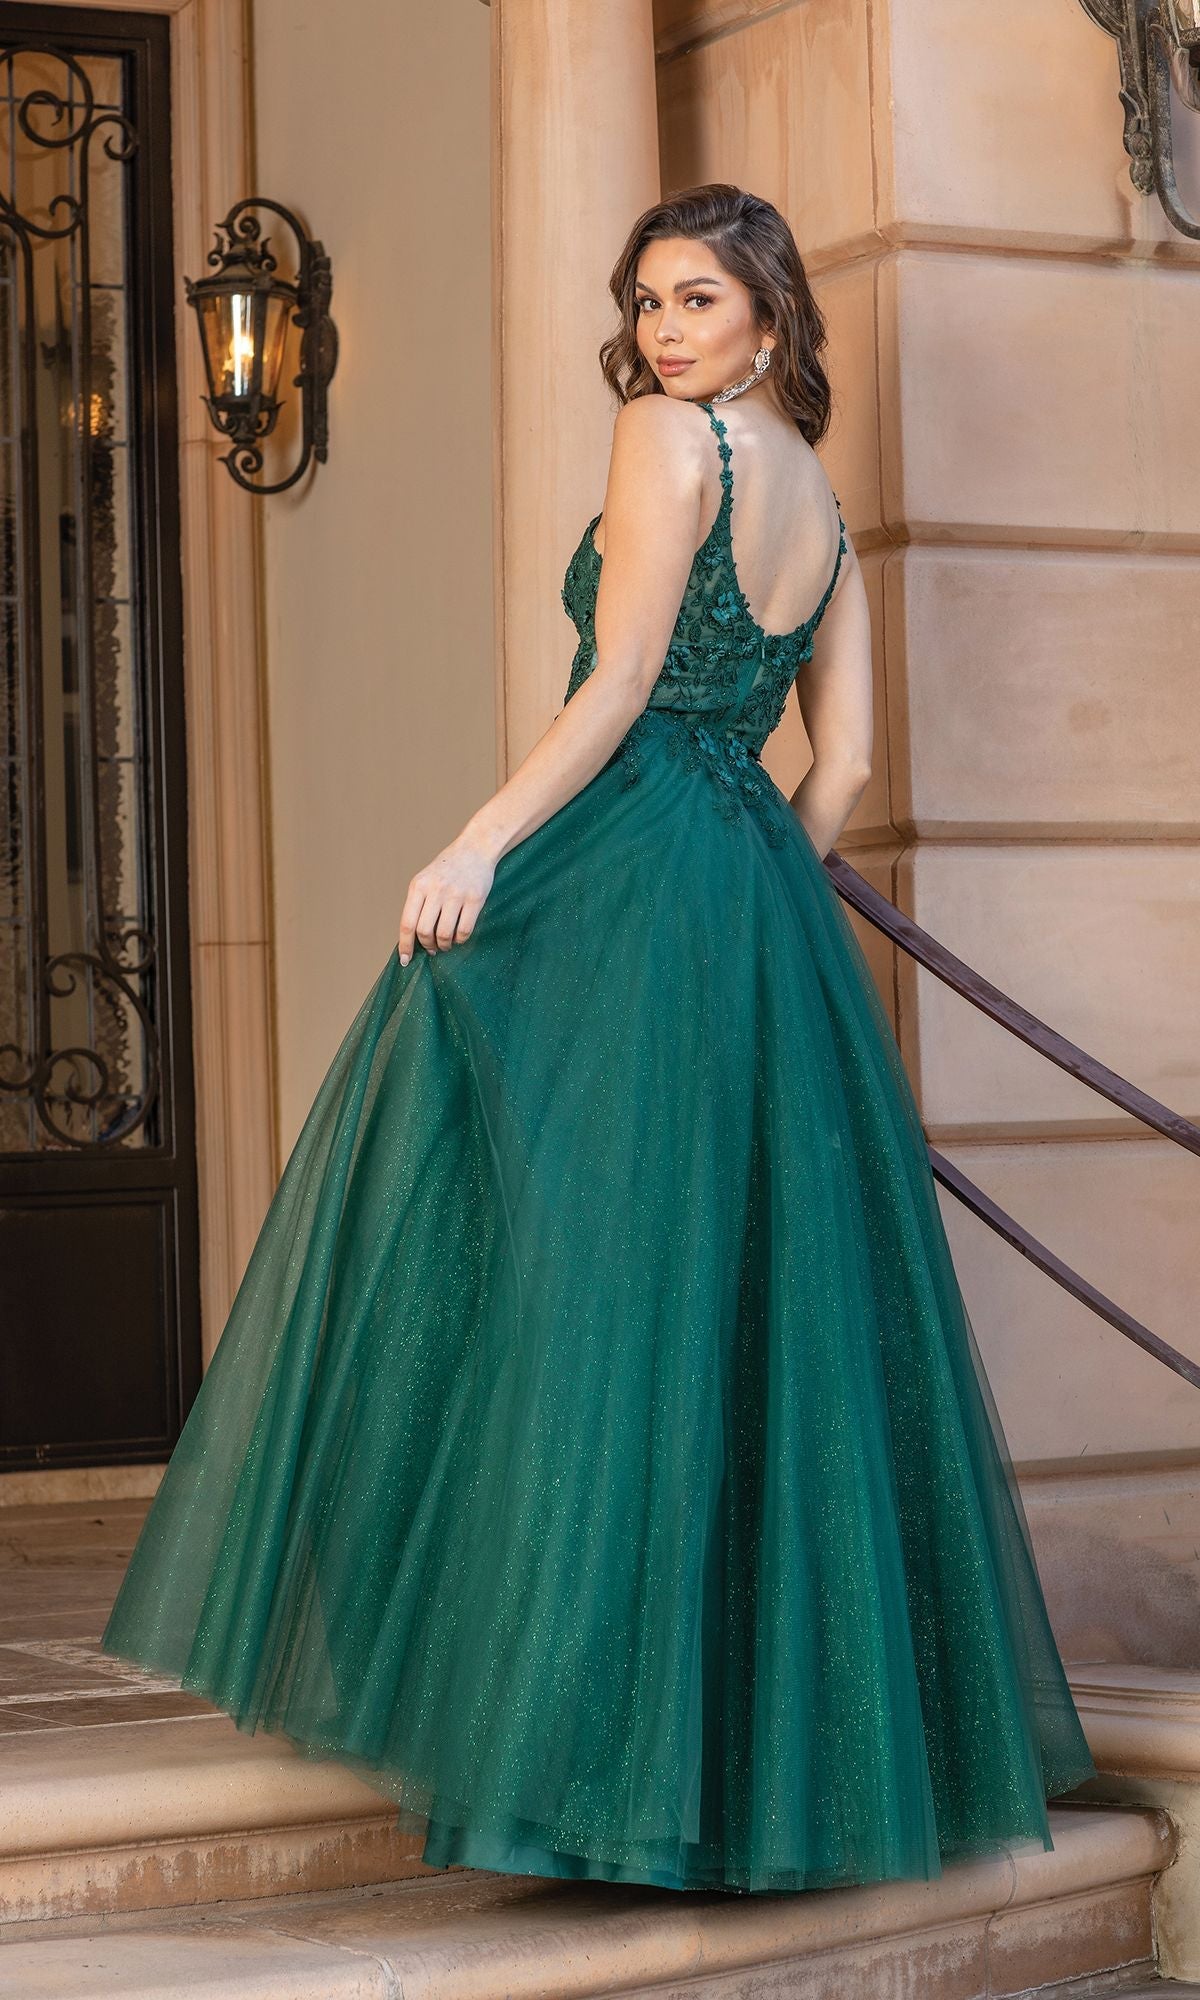 Emerald Green Outfits Are The New Pick For Wedding Festivities | Indian  bride outfits, Indian wedding outfits, Indian wedding gowns